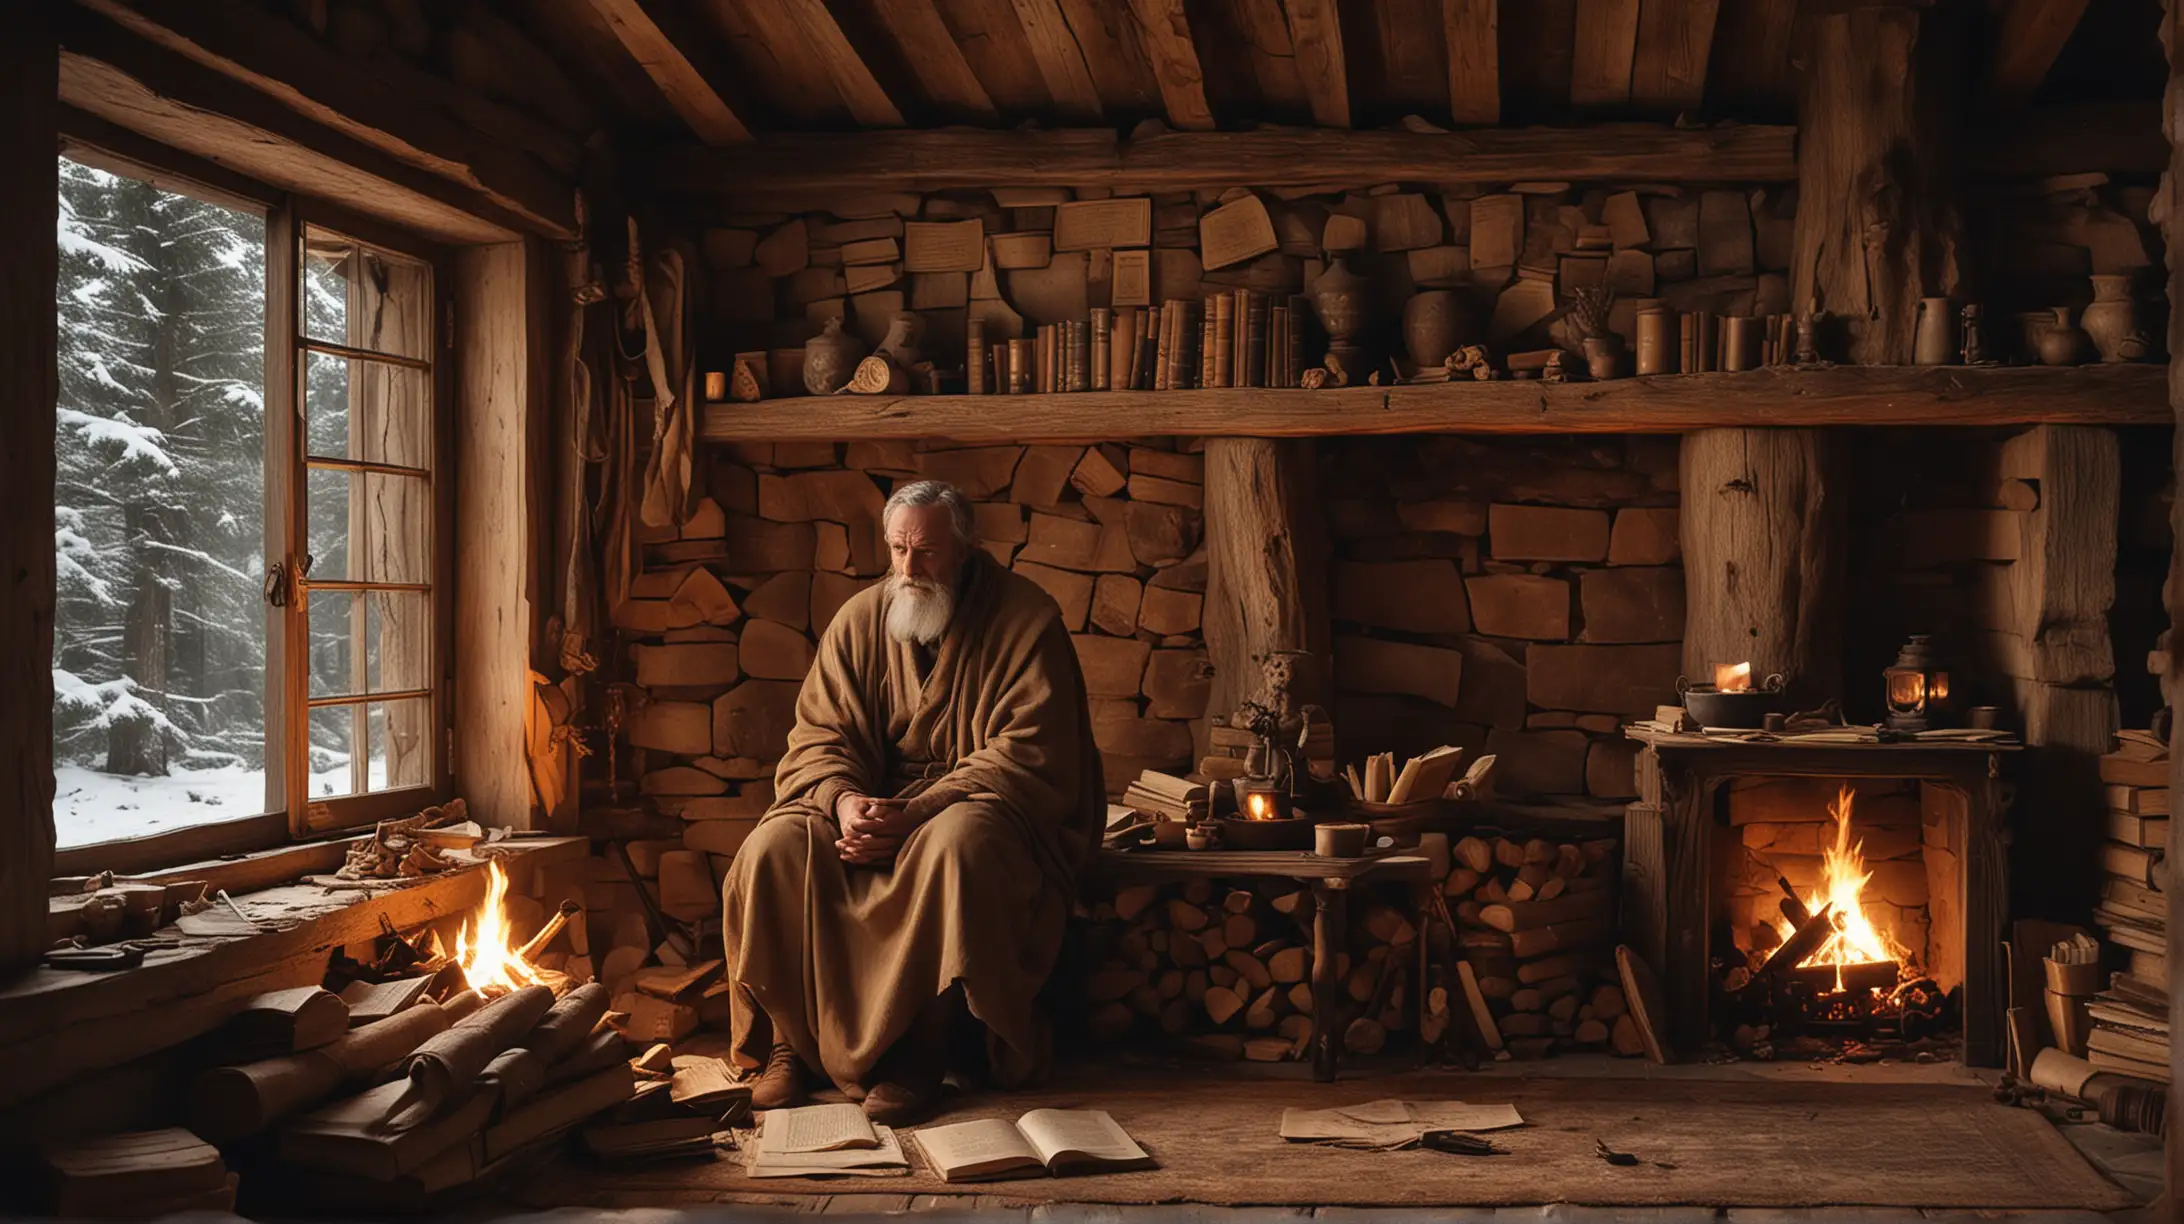 Visualization Prompt: Create an image of a stoic philosopher seated by a crackling fire in a rustic cabin, surrounded by stacks of ancient scrolls and tomes, as he delves into the timeless wisdom of stoic philosophy.
Image Description: The image depicts a stoic philosopher seated by a roaring fireplace inside a cozy cabin nestled amidst towering pine trees. The philosopher's muscular figure is illuminated by the warm glow of the flames, his brow furrowed in deep concentration as he pores over the pages of ancient texts. The rustic interior is adorned with shelves filled with scrolls and parchment, reflecting the philosopher's dedication to the study of stoic philosophy. Outside, snowflakes drift lazily past the window, adding to the sense of solitude and introspection pervading the scene.
